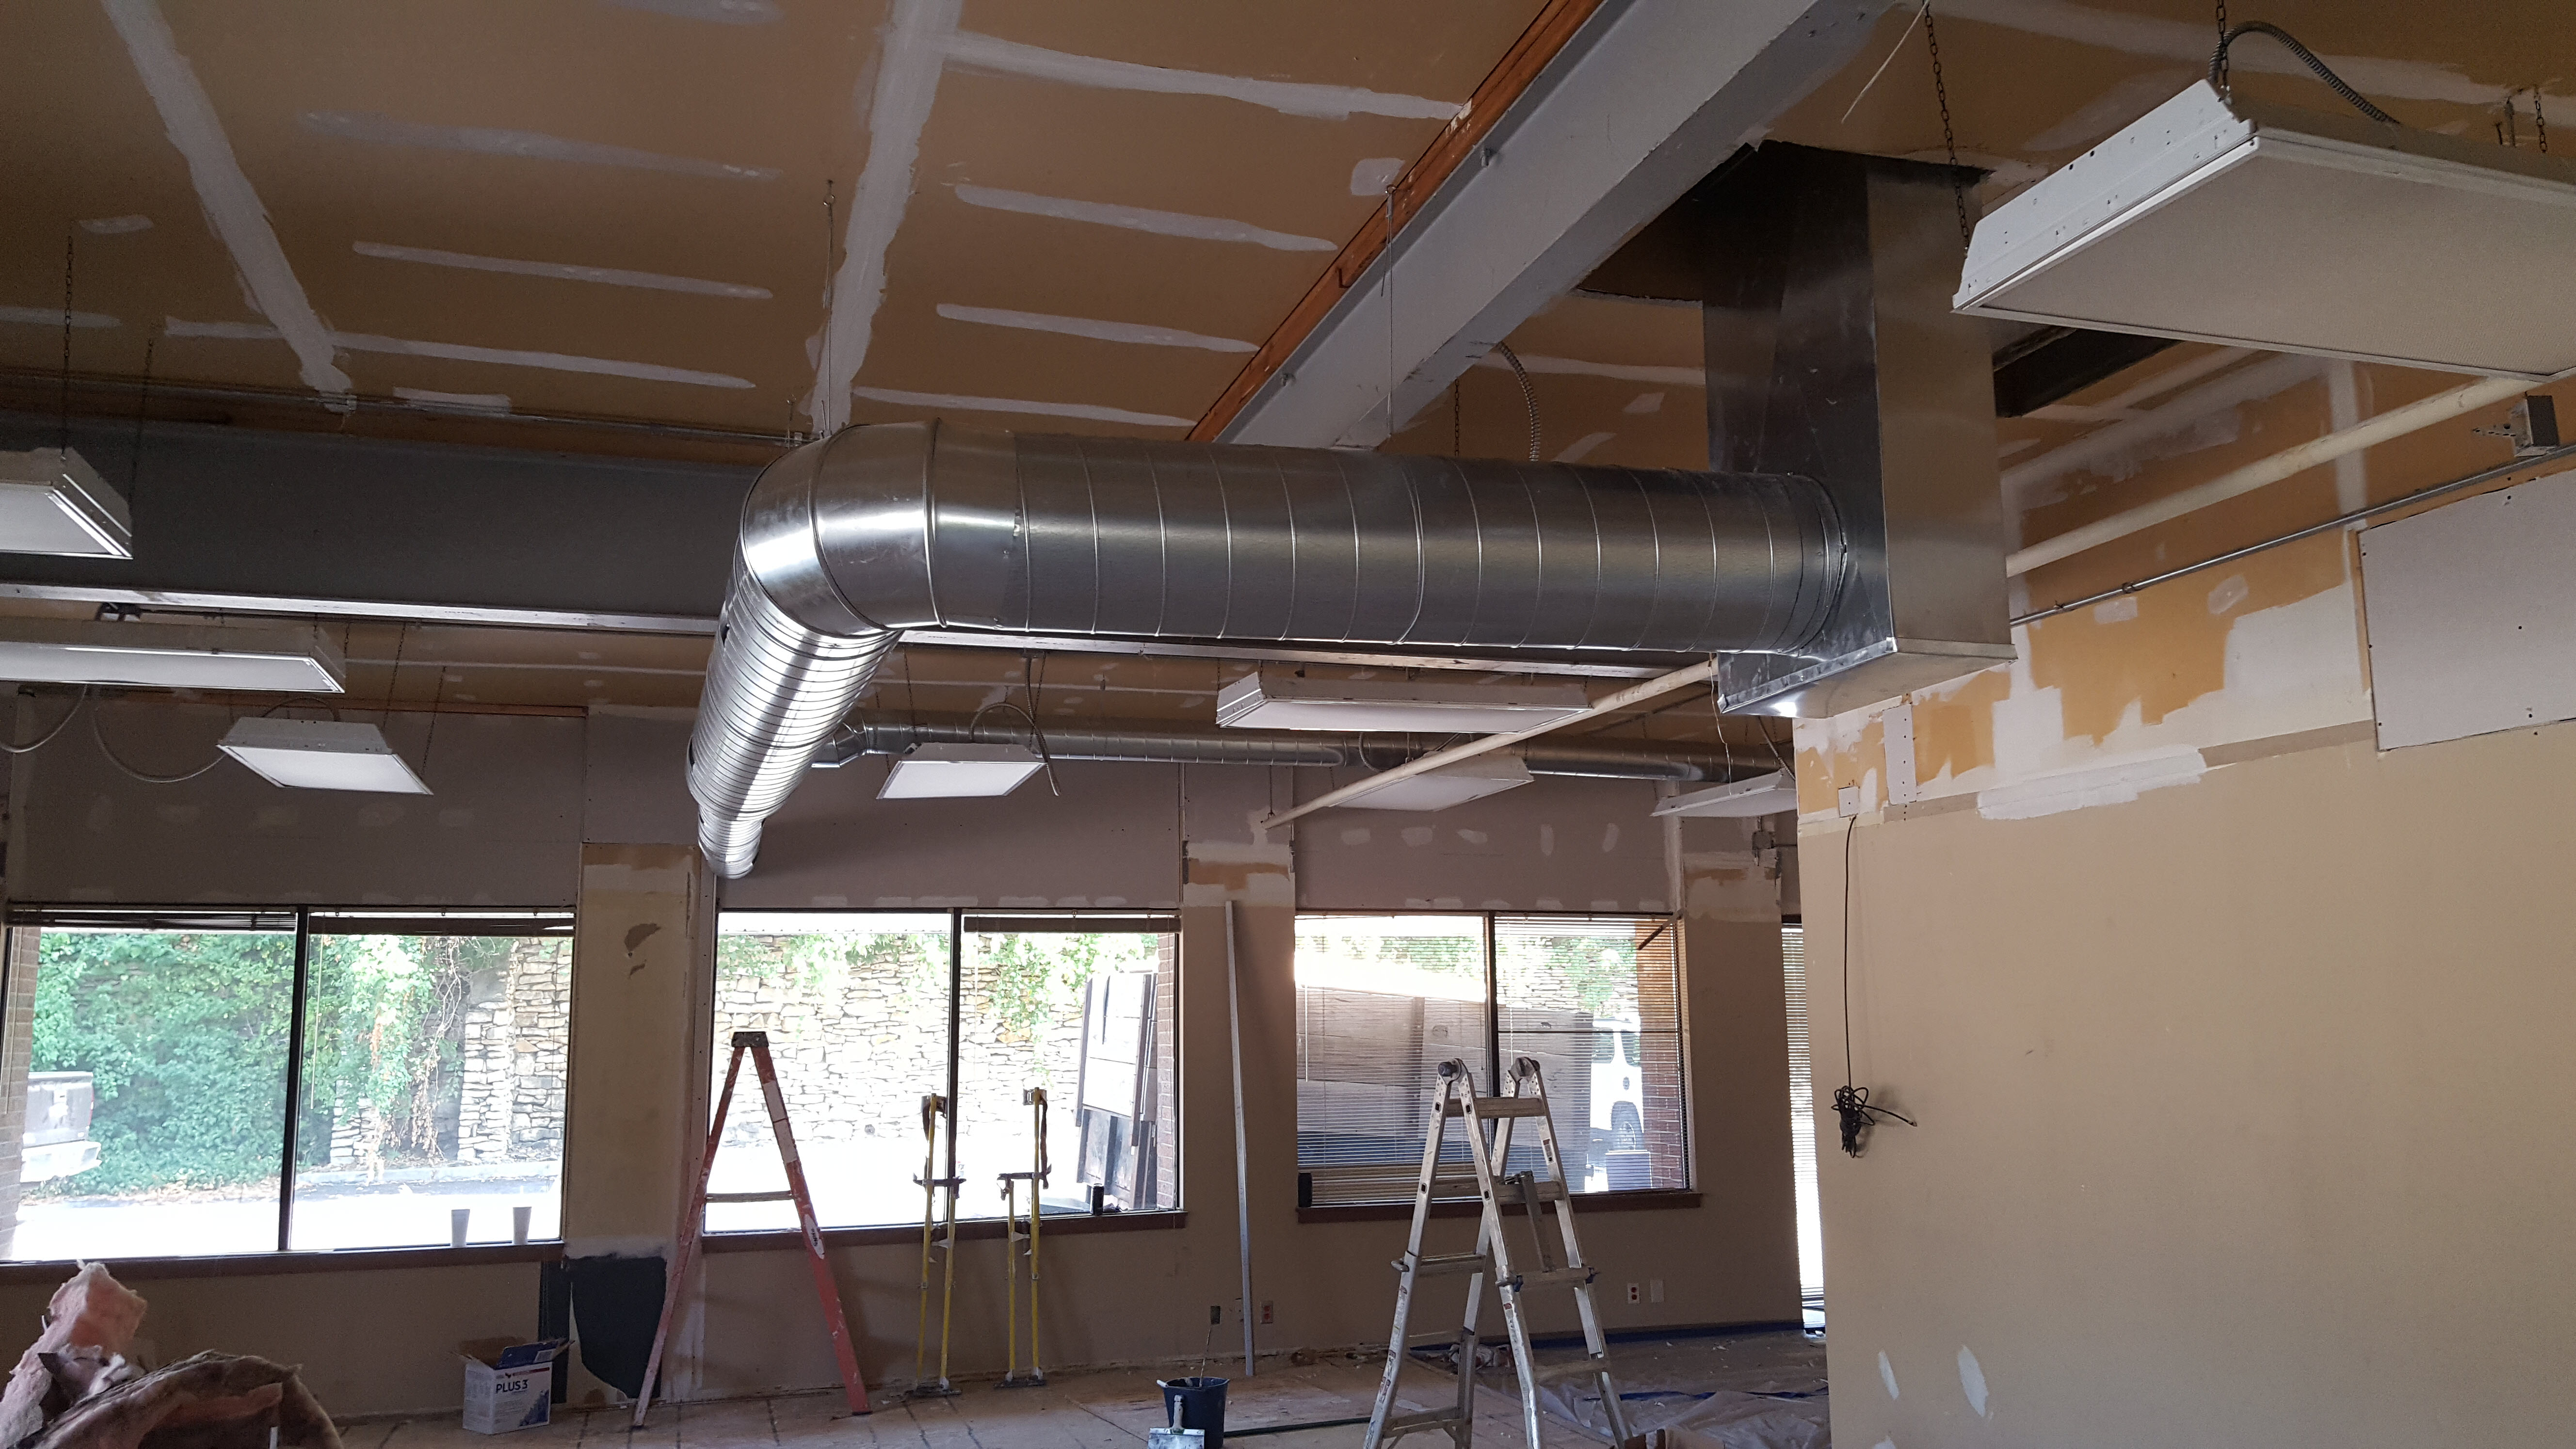 Ductwork Services in Lenexa, KS & Kansas City, MO - Top Notch Heating and Air